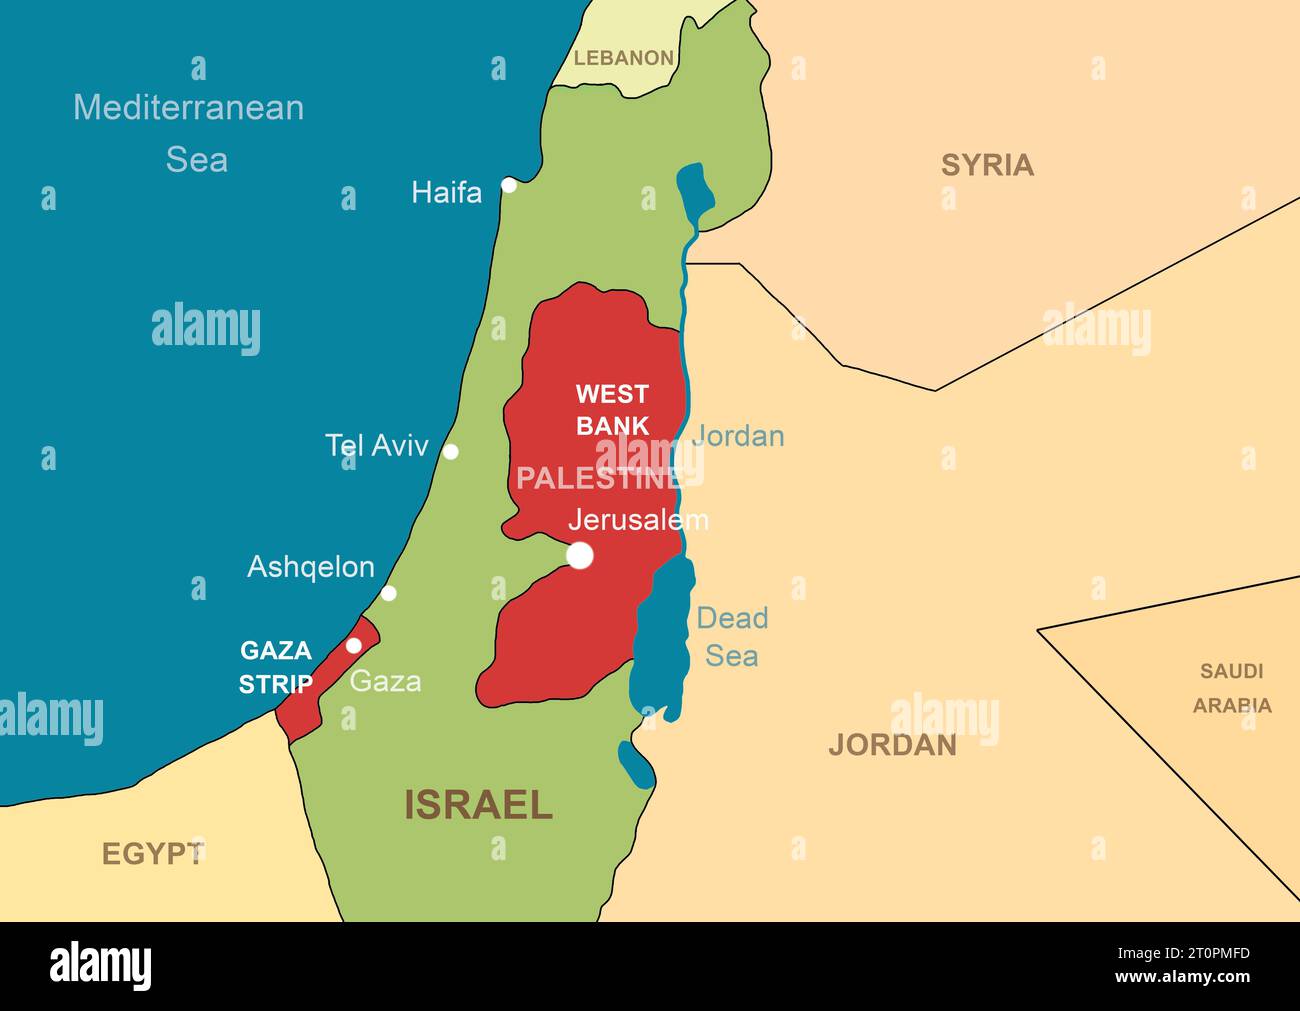 Israel and Palestine in Middle East on contour map. Palestinian territories of Gaza and West Bank. Jerusalem and Jordan River on outline map. Theme of Stock Photo